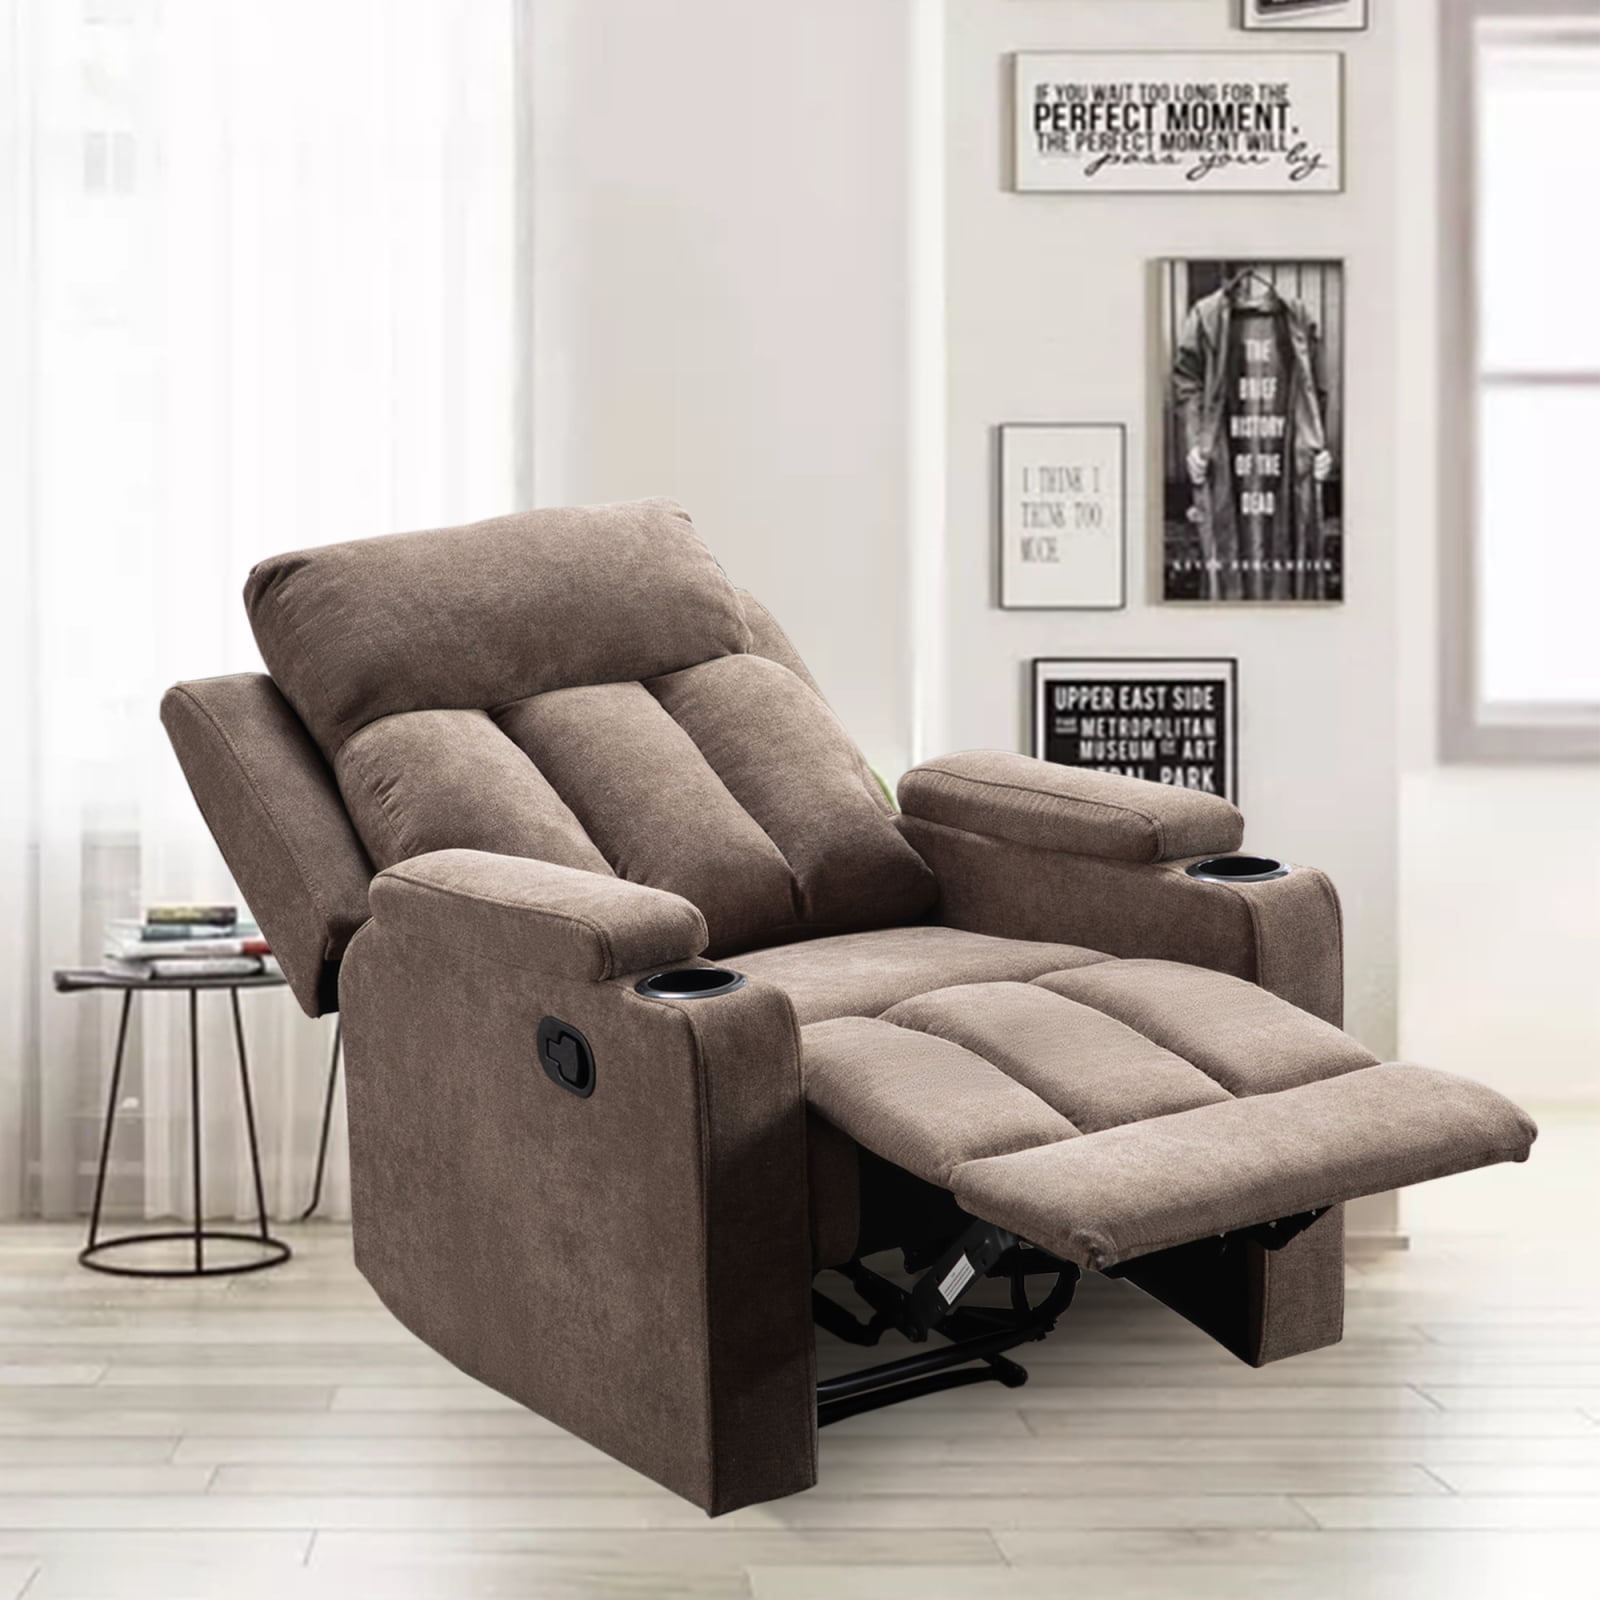 Minimalist Recliner Sofa Single Chair for Large Space